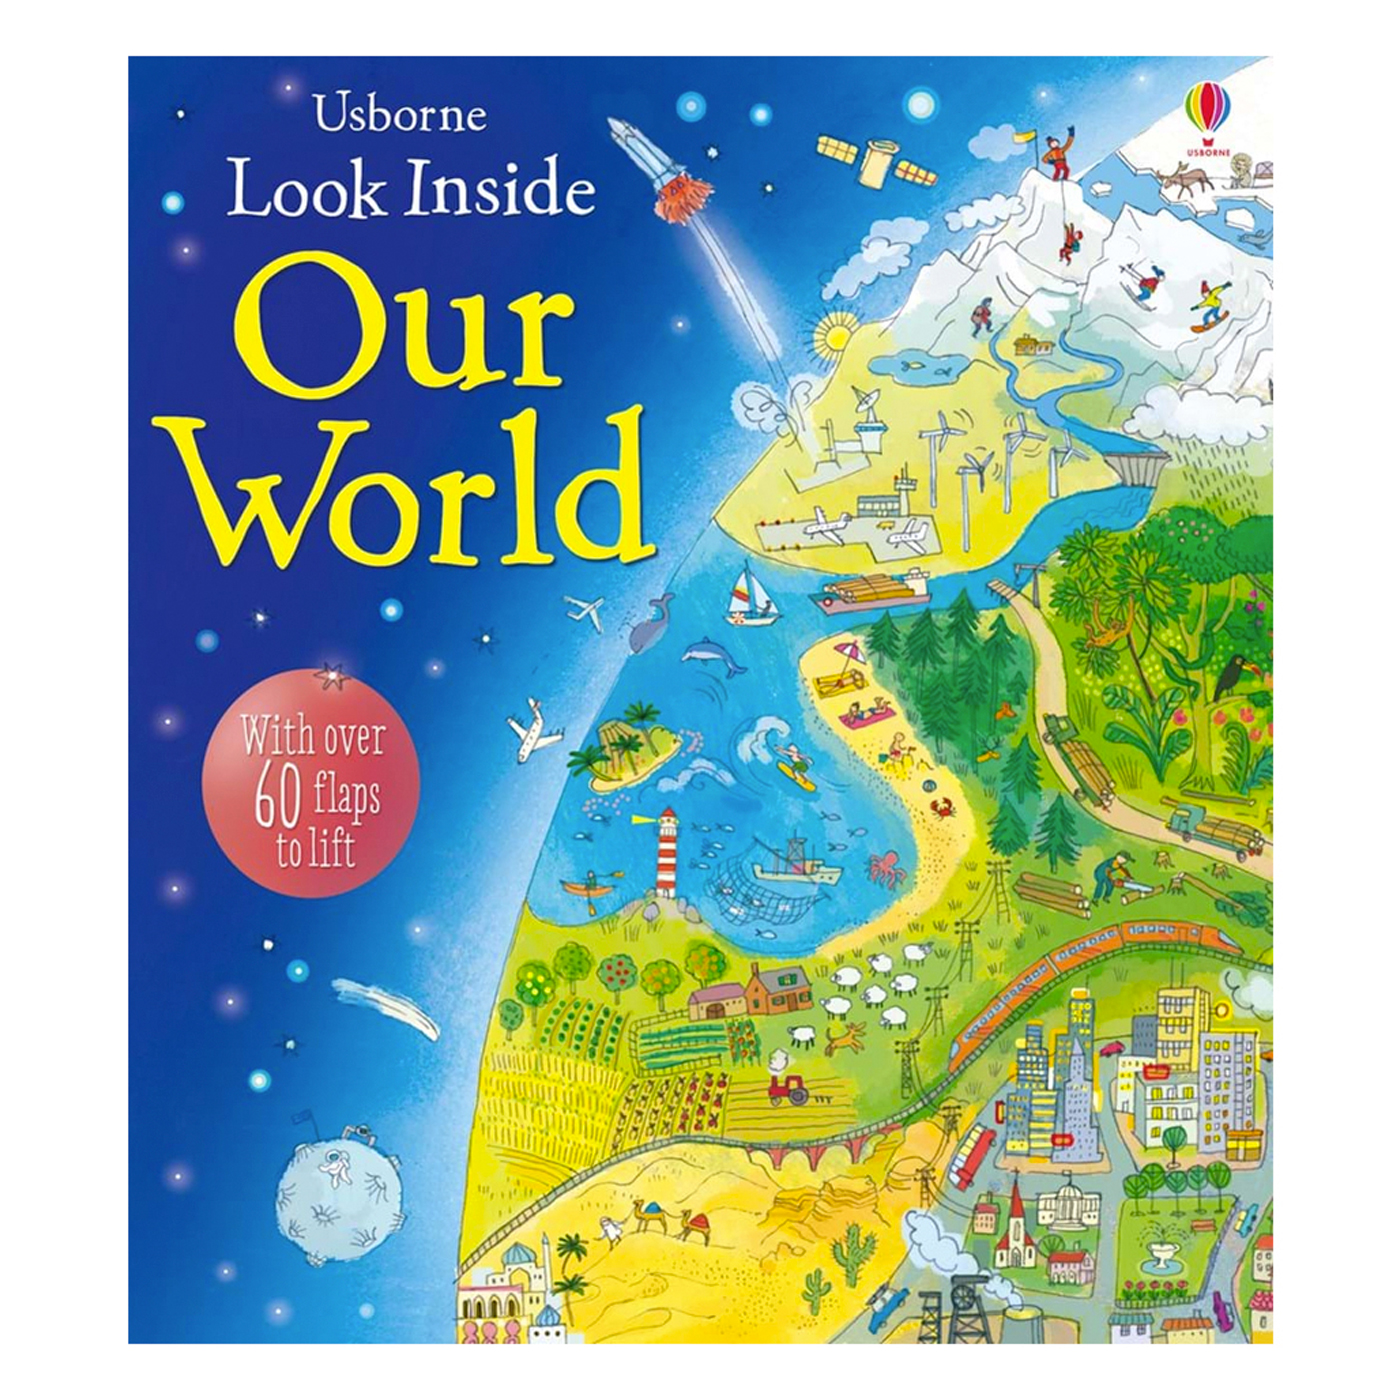  Look Inside: Our World